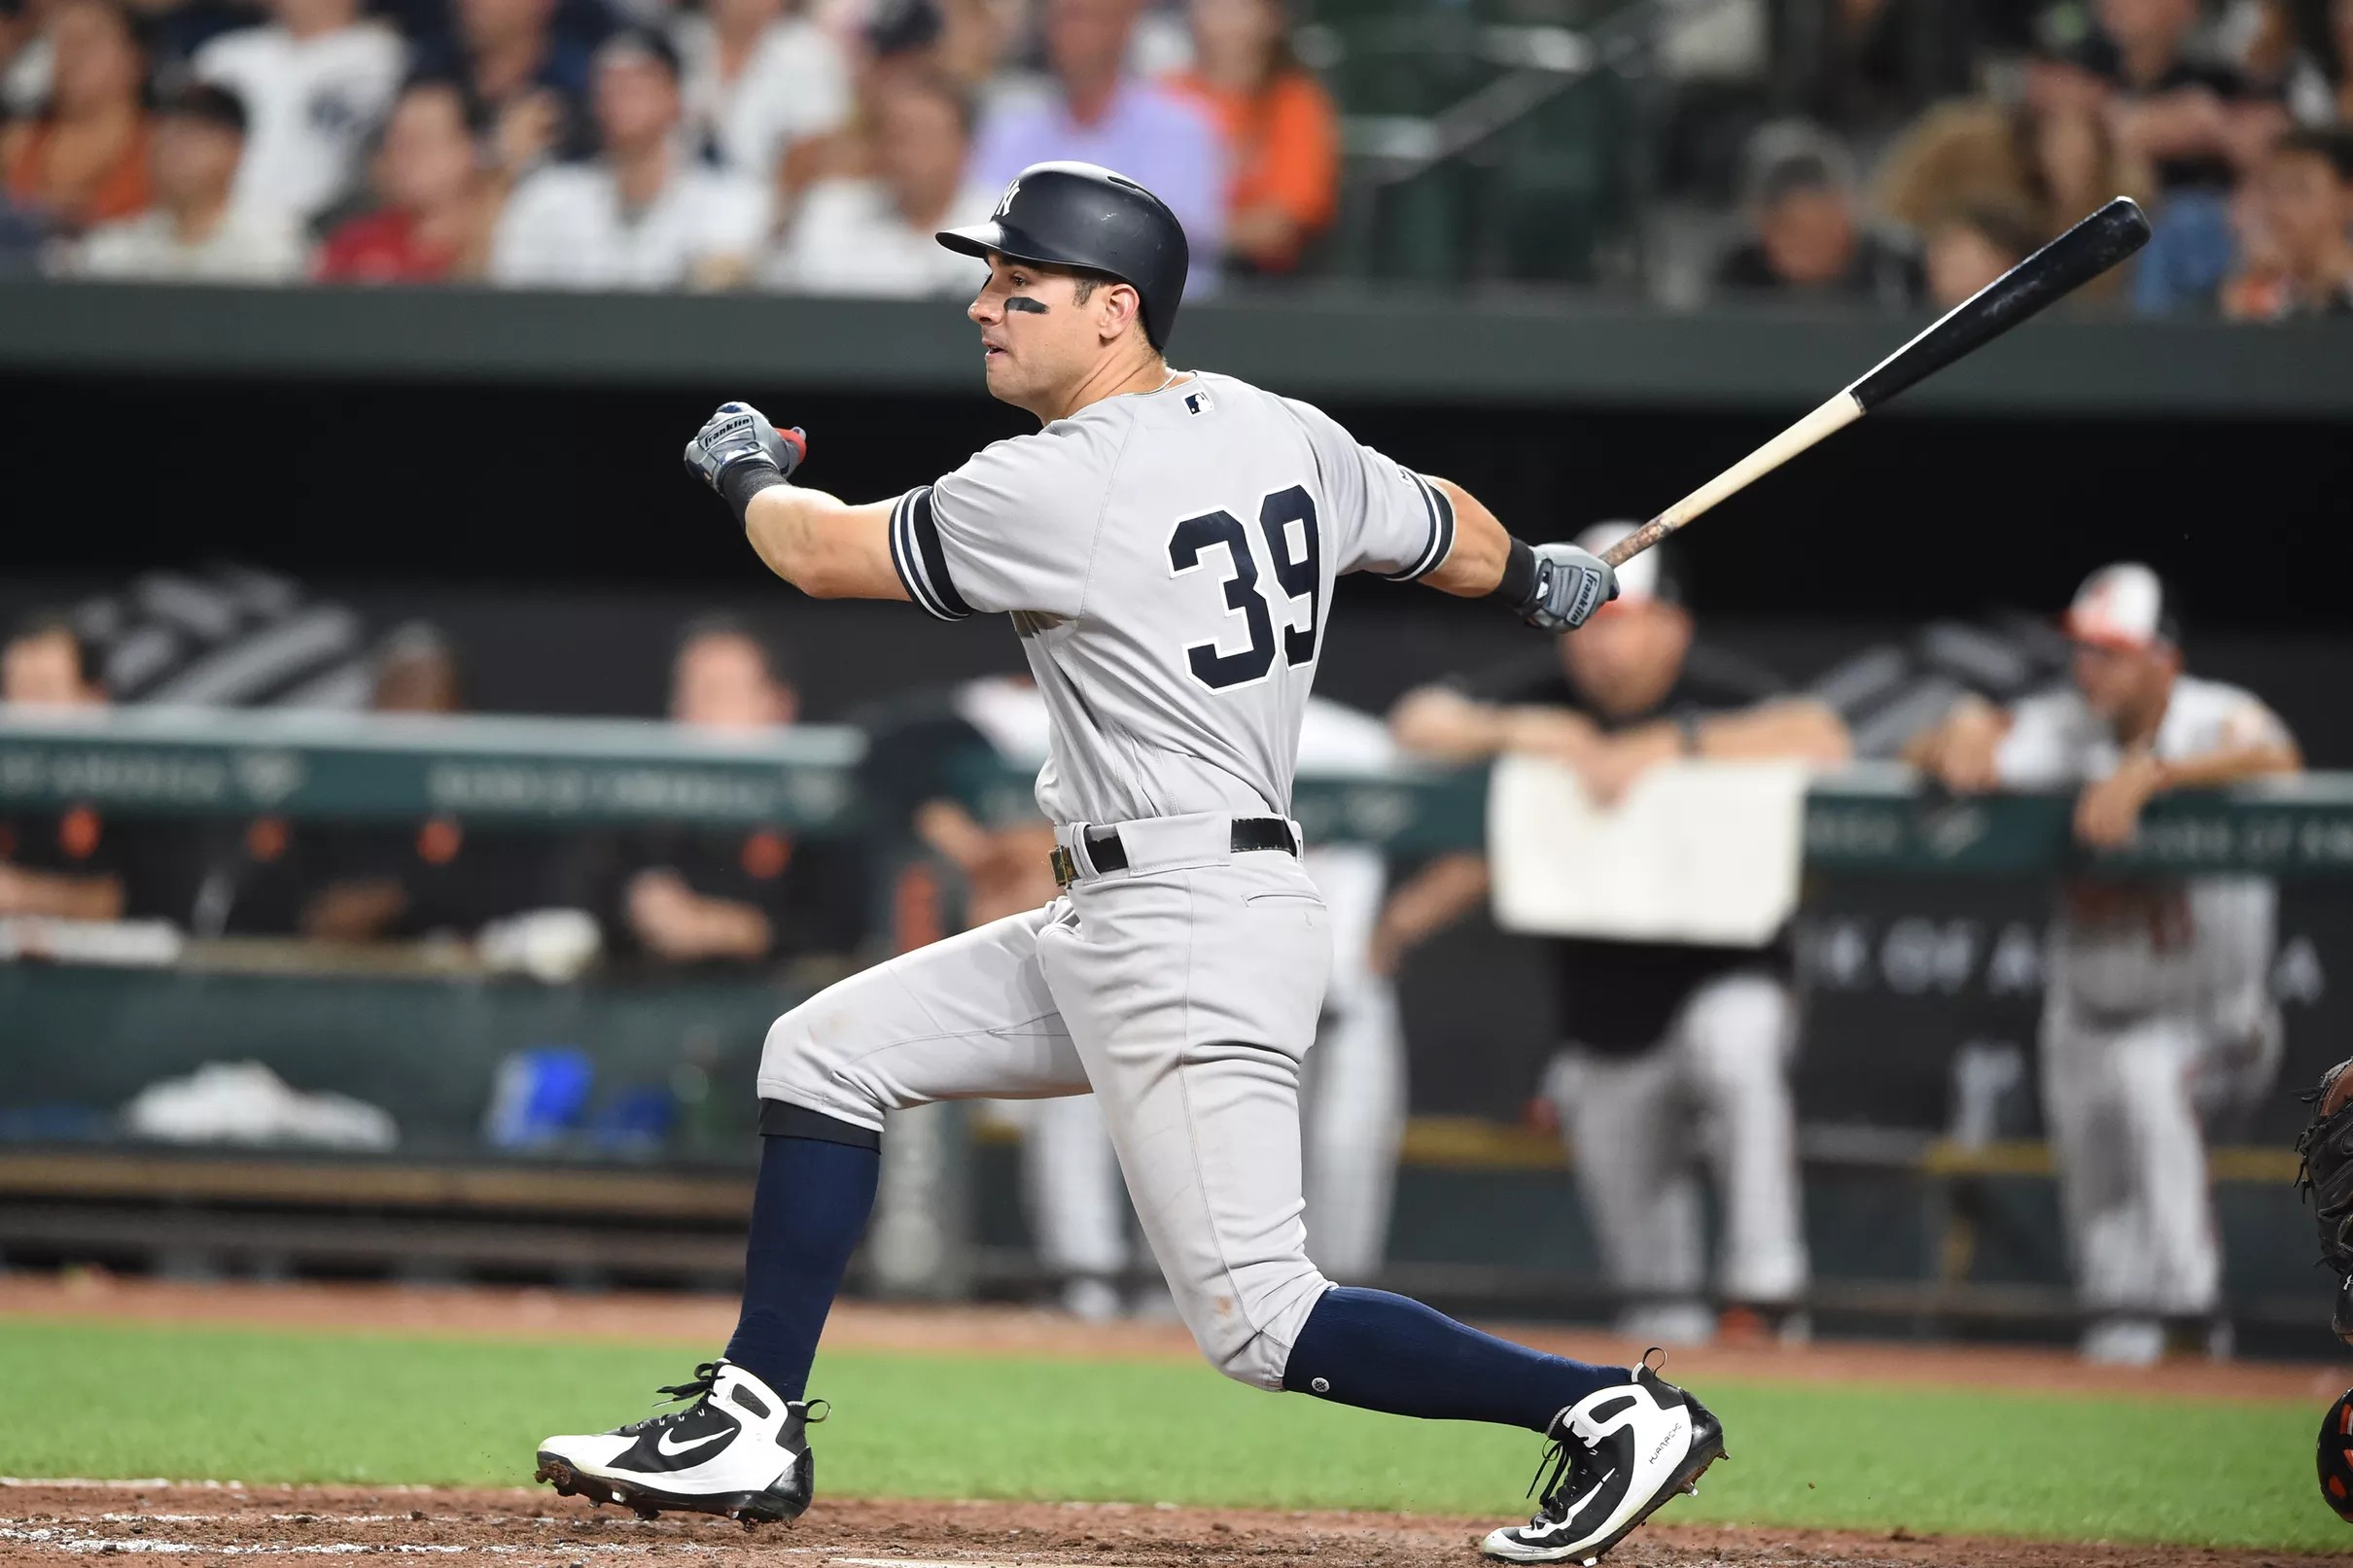 Under the Hood: Mike Tauchman may be benefiting from good luck